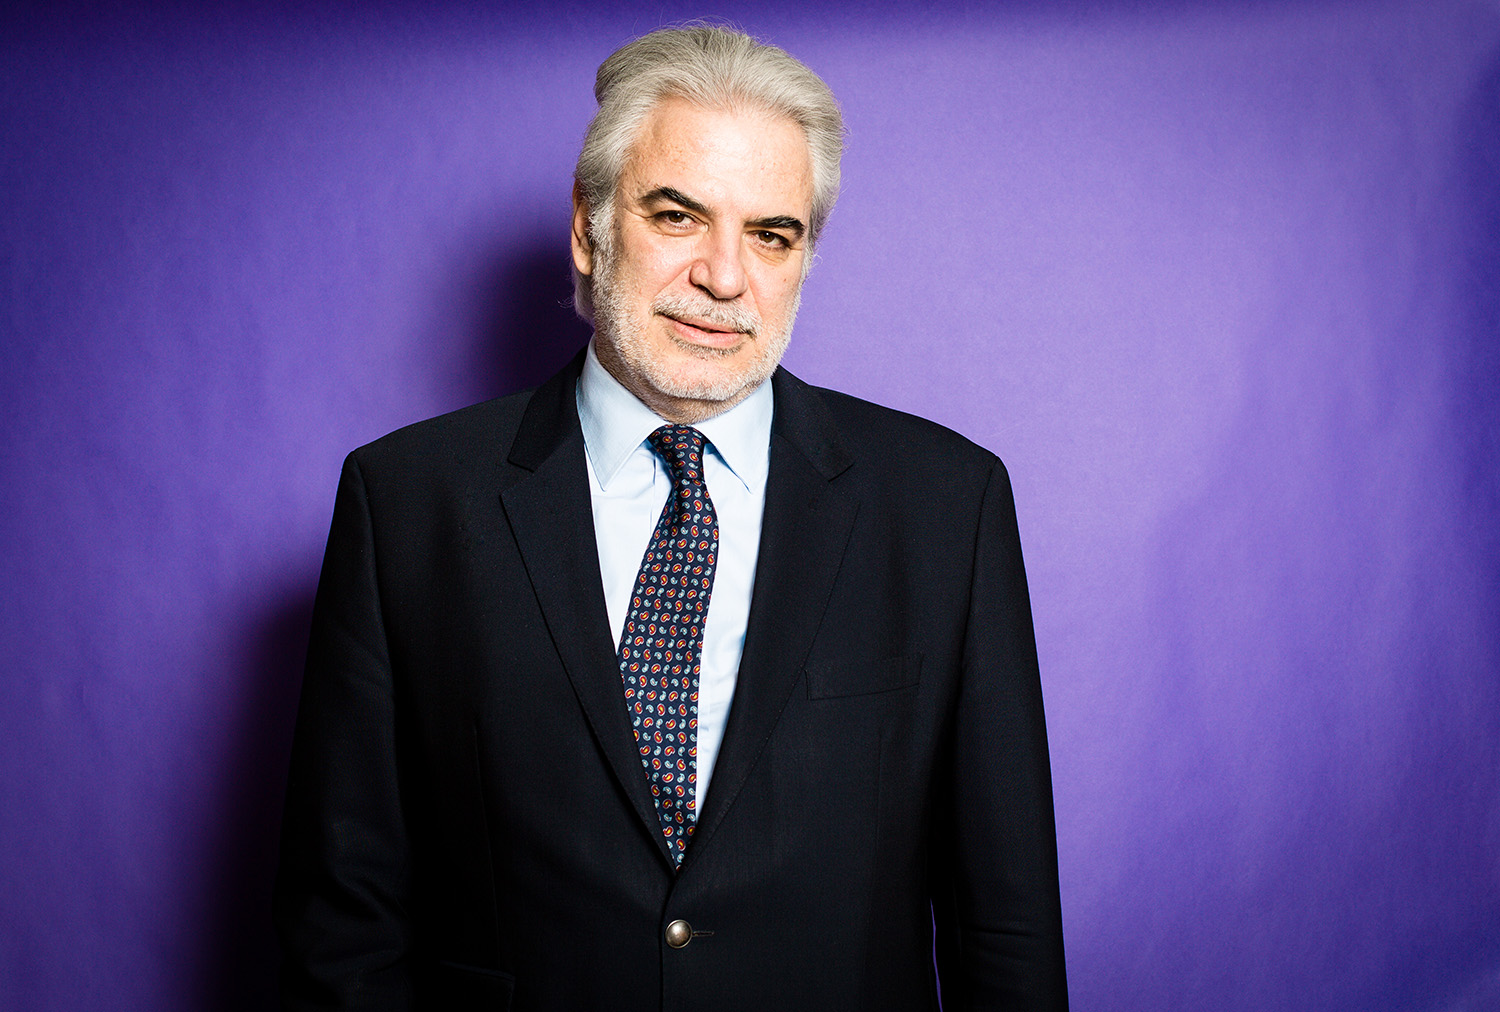 Commissioner Stylianides